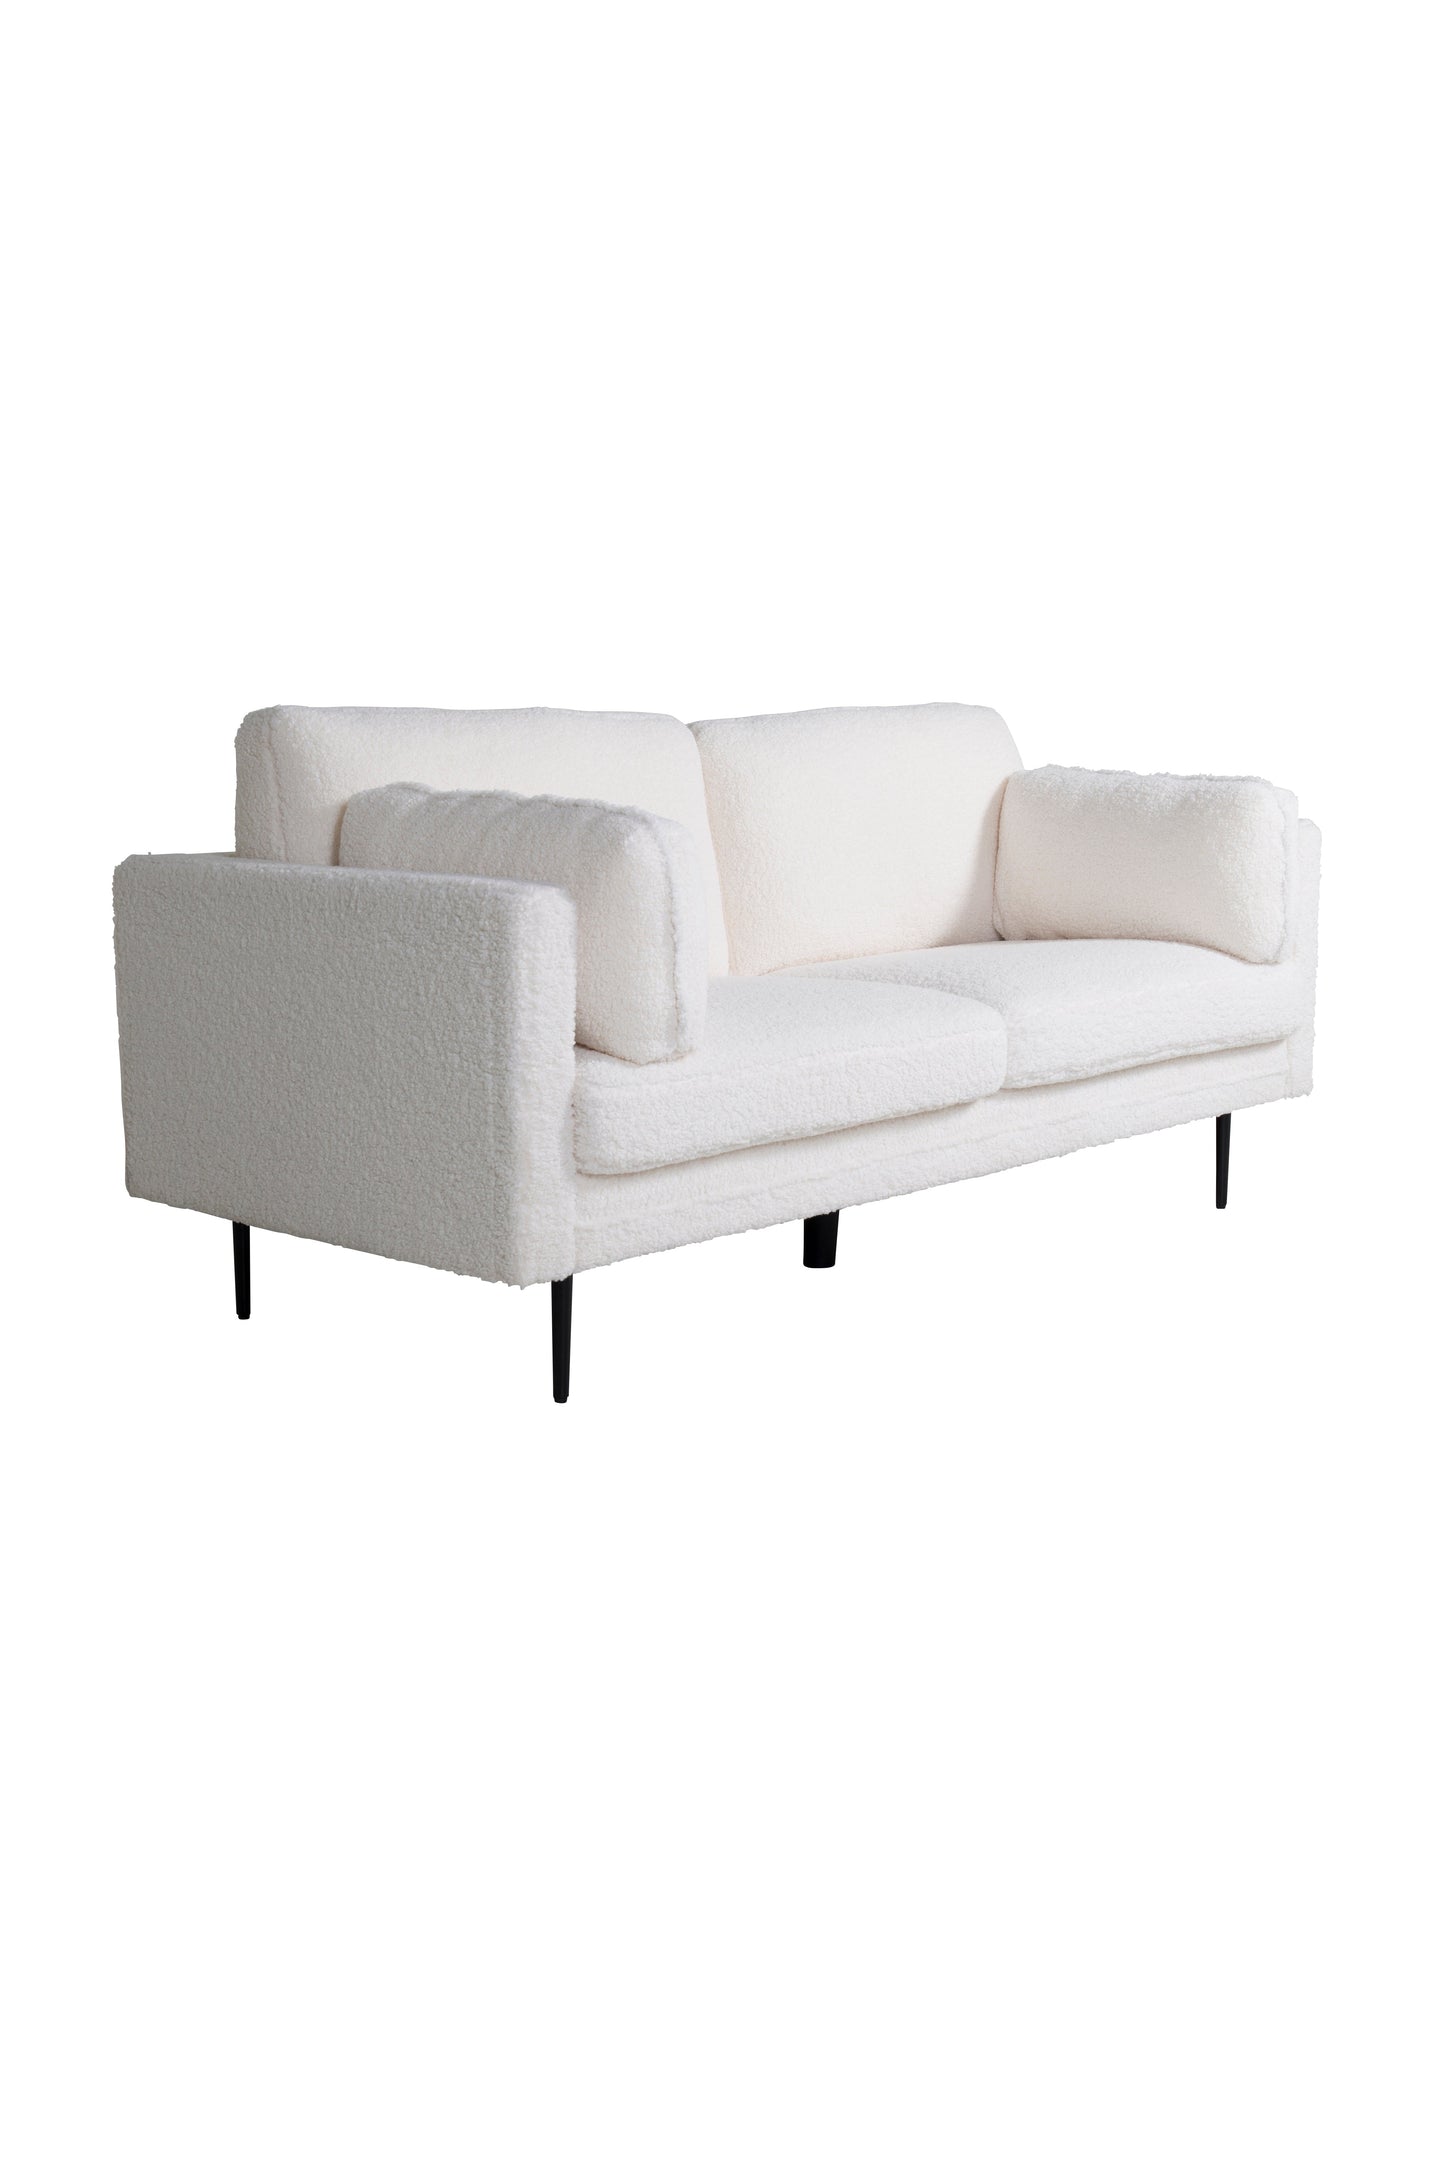 Boom 3 personers sofa - Teddy Stof Hvid / Outlet